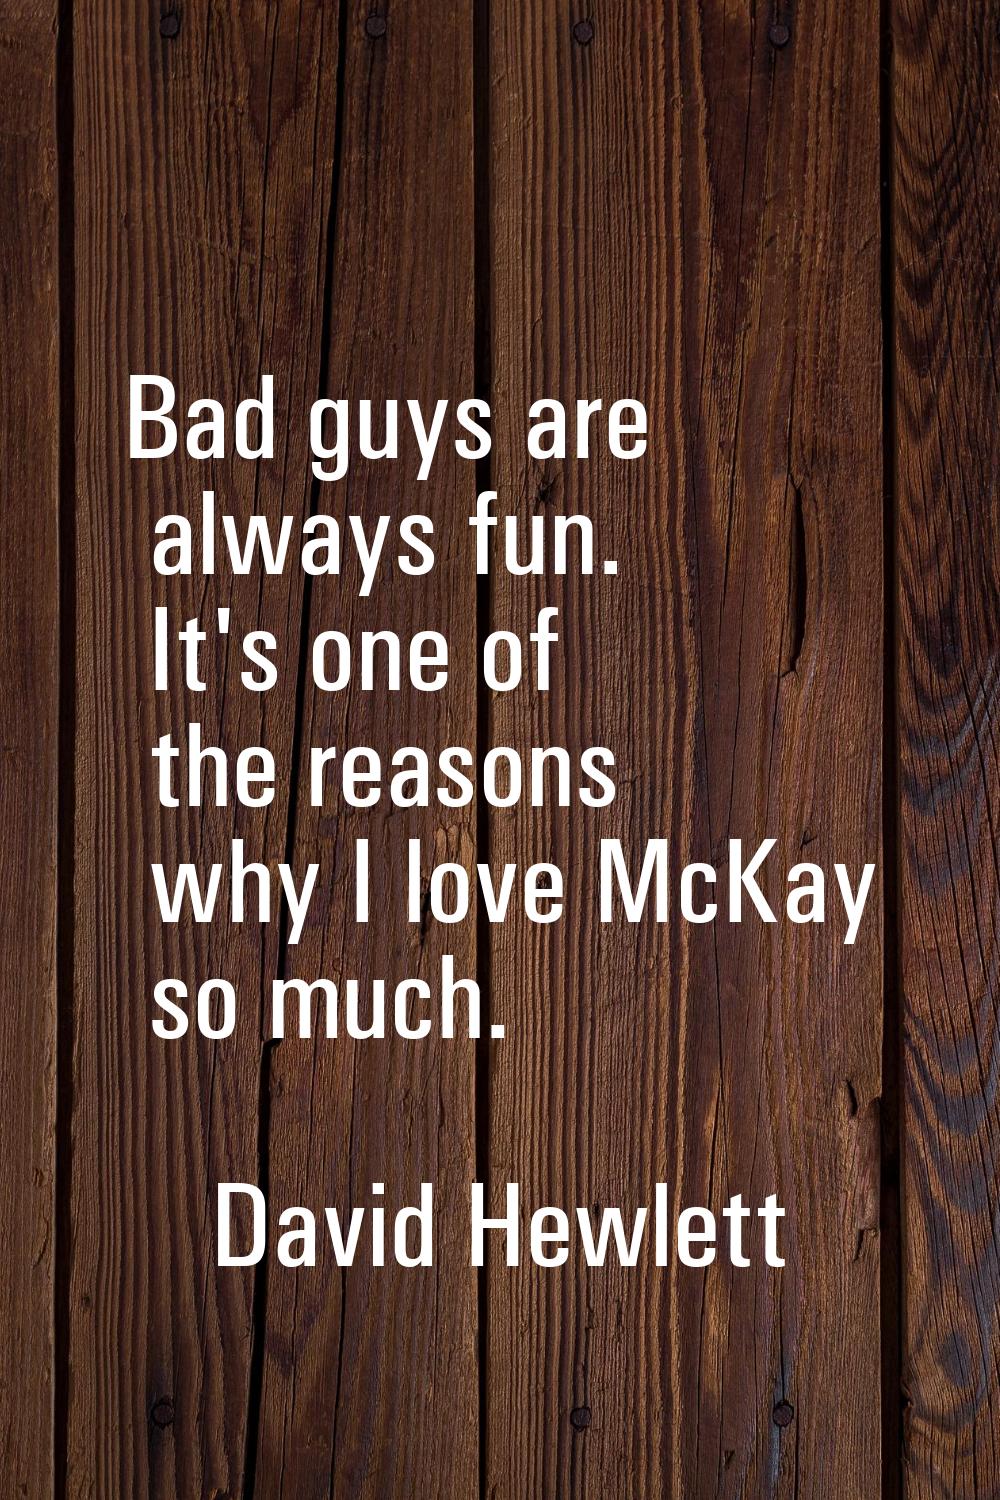 Bad guys are always fun. It's one of the reasons why I love McKay so much.